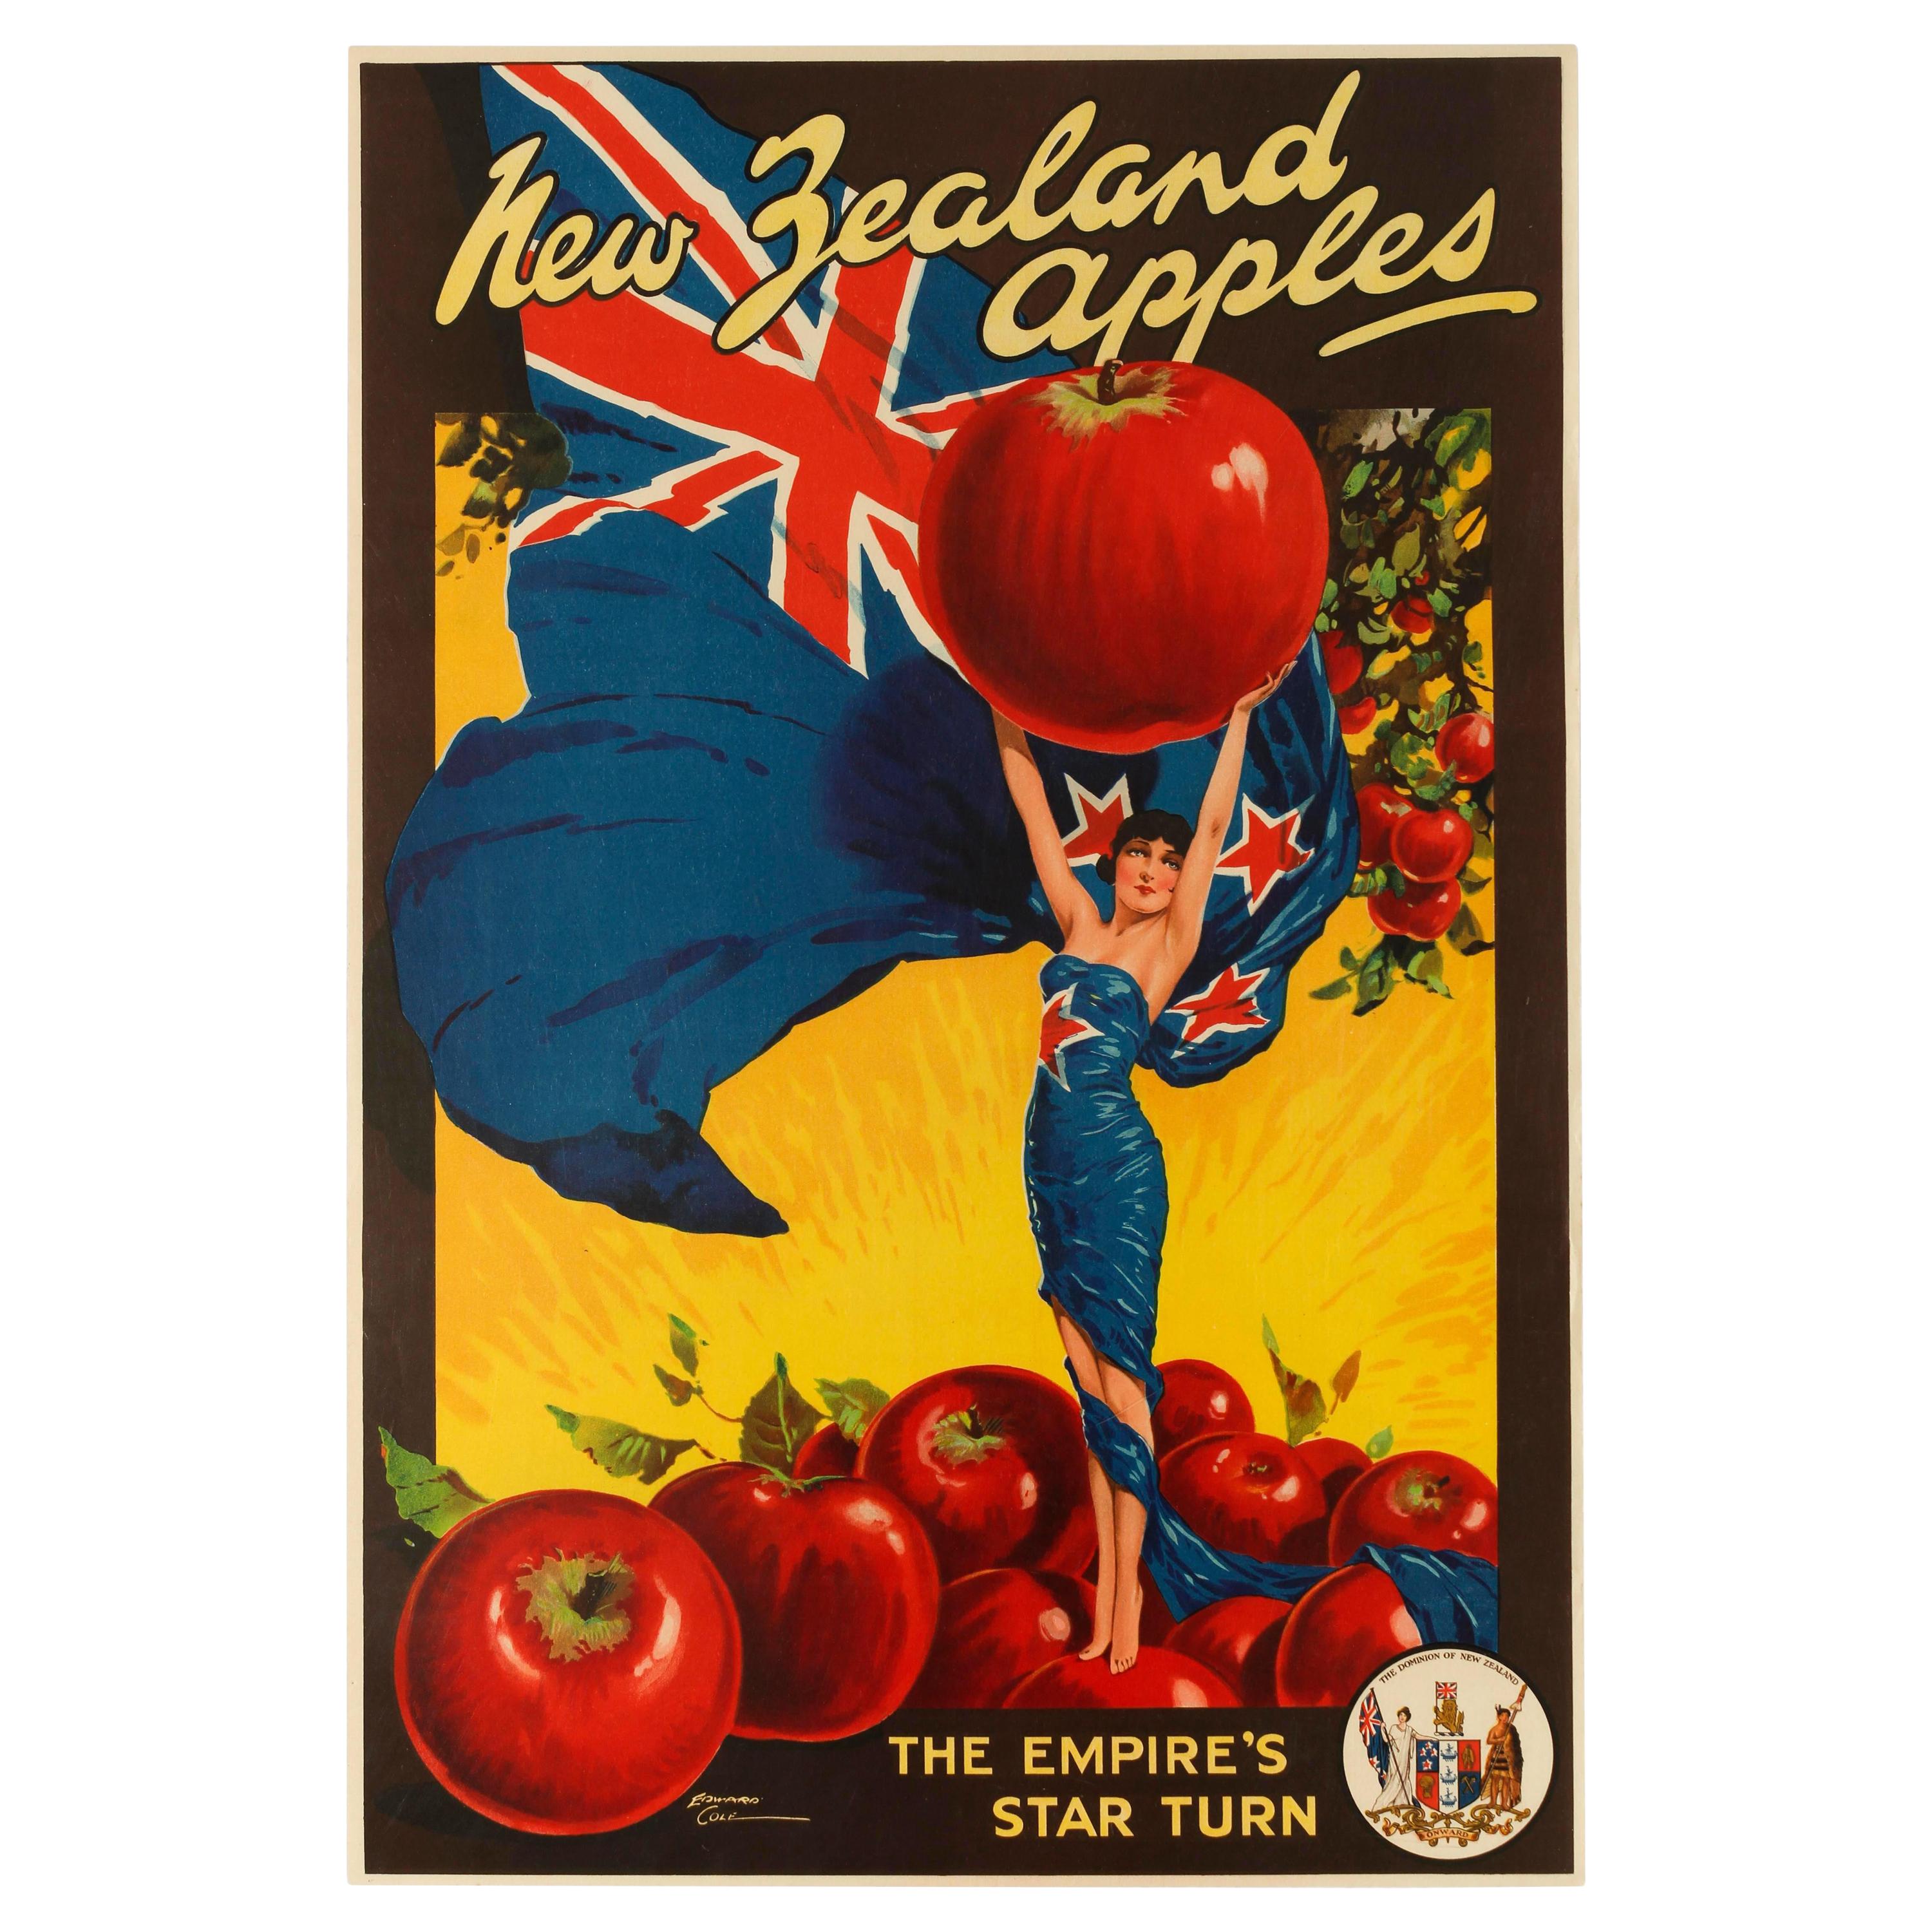 Original Vintage Poster For New Zealand Apples British Empire Trade Commonwealth